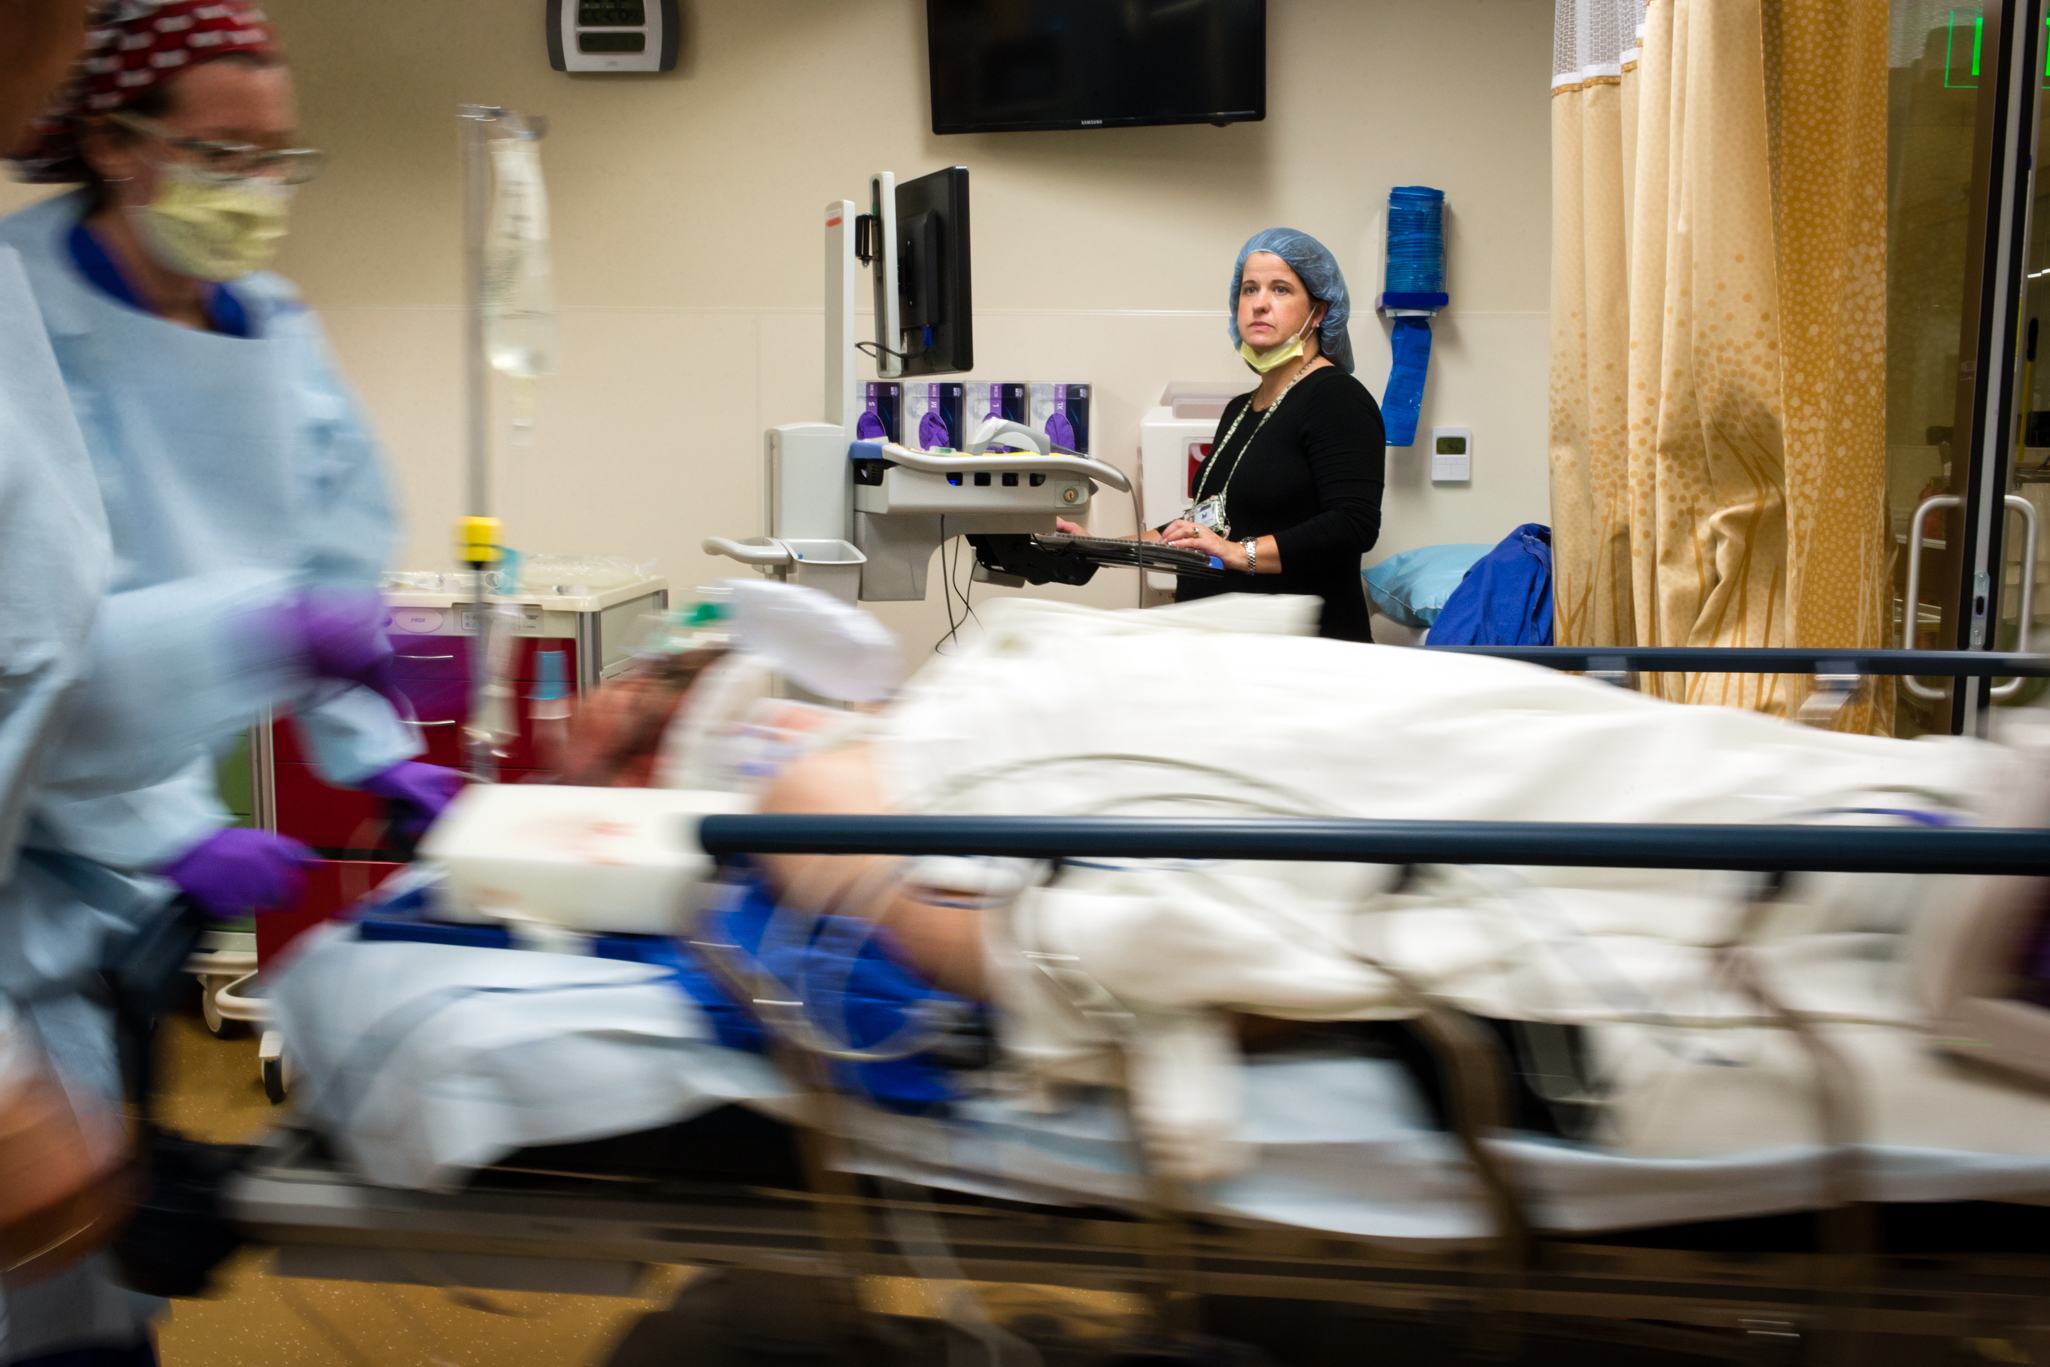  Most hospital nurses work a specific territory: one unit in the facility, one slot in a sprawling hierarchy of caregivers. Not Jennifer Parker. The 40-year-old Legacy Emanuel nurse describes her job as “putting out fires wherever they happen.” She’s